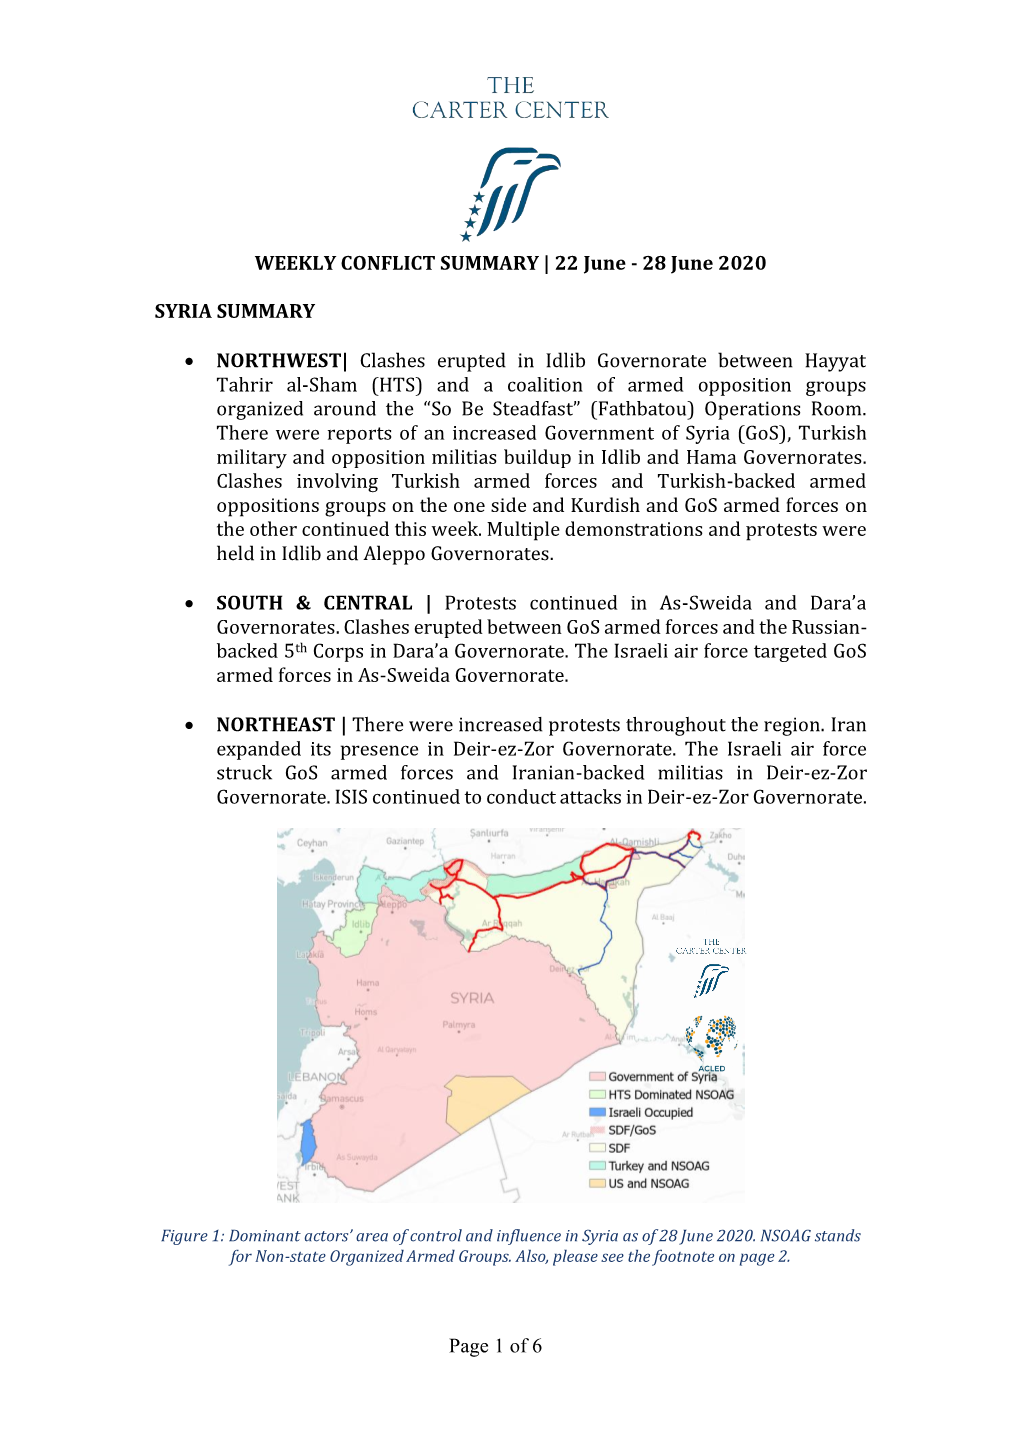 Page 1 of 6 WEEKLY CONFLICT SUMMARY | 22 June